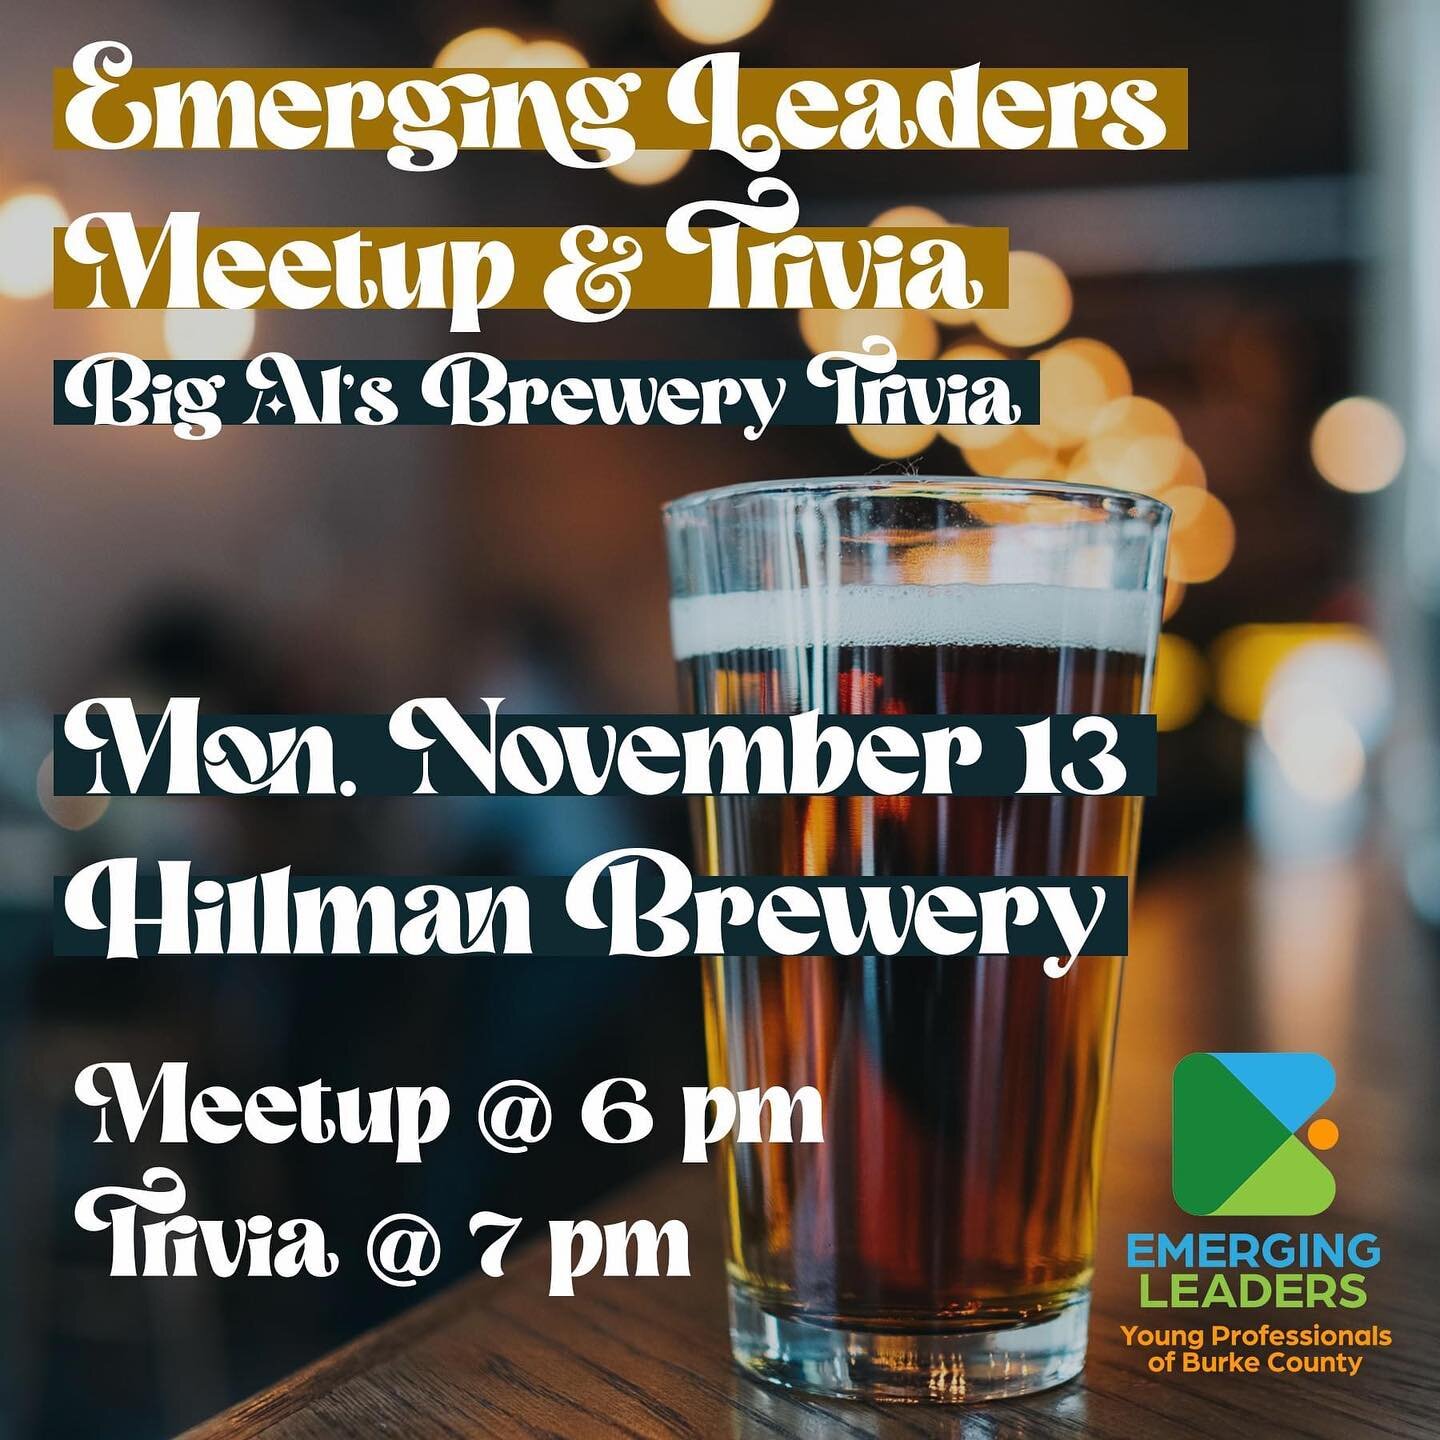 Hey Emerging Leaders! 
Join us this evening at 6 pm for a meetup at @hillmanbeermorganton in @downtown_motown, and if you want, stay for Big Al's Brewery Trivia at 7. If we have a lot of trivia team members, we'll break up into more teams!